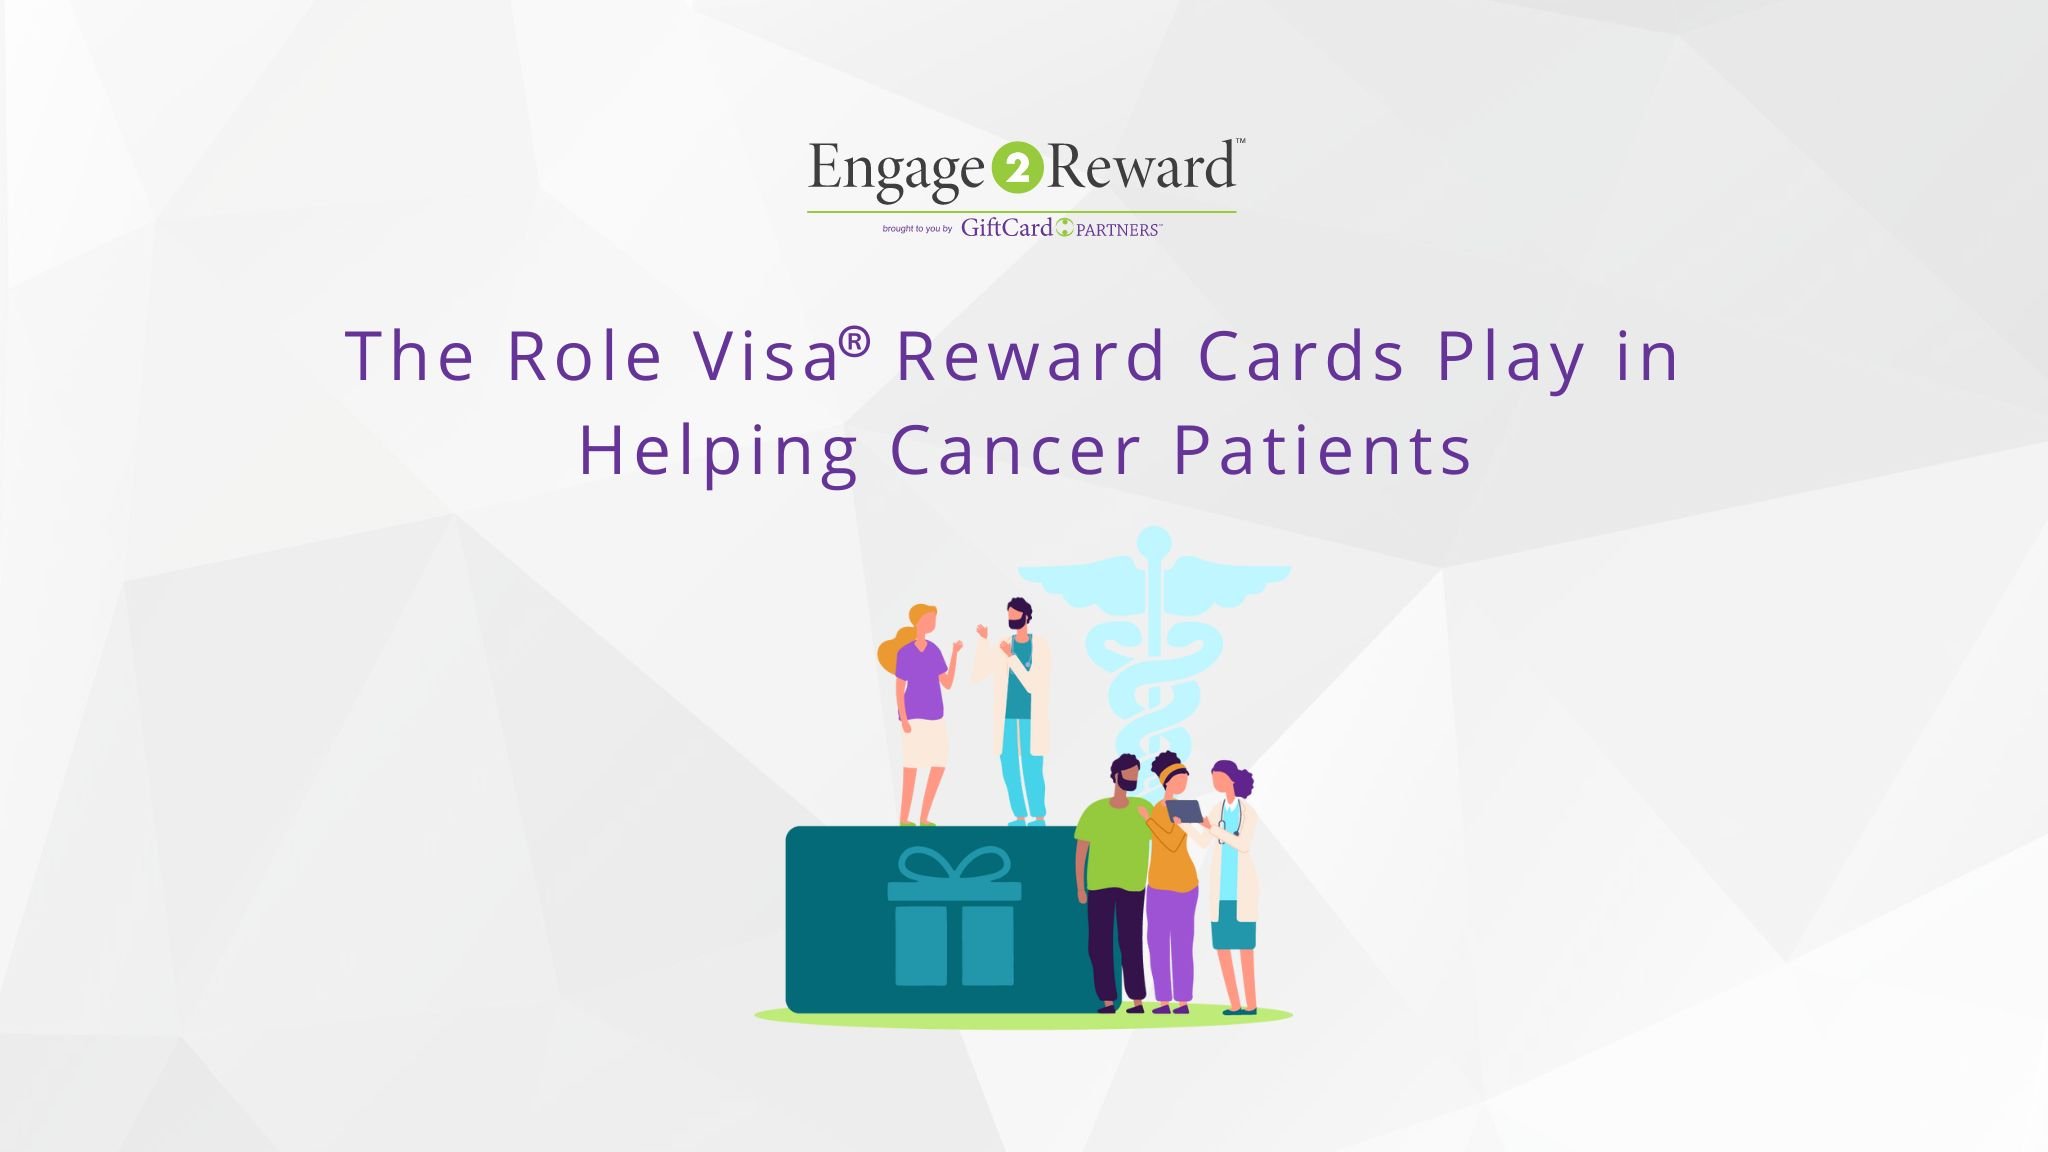 Visa Reward Card provides an efficient and effective way to provide personalized support to cancer patients. 